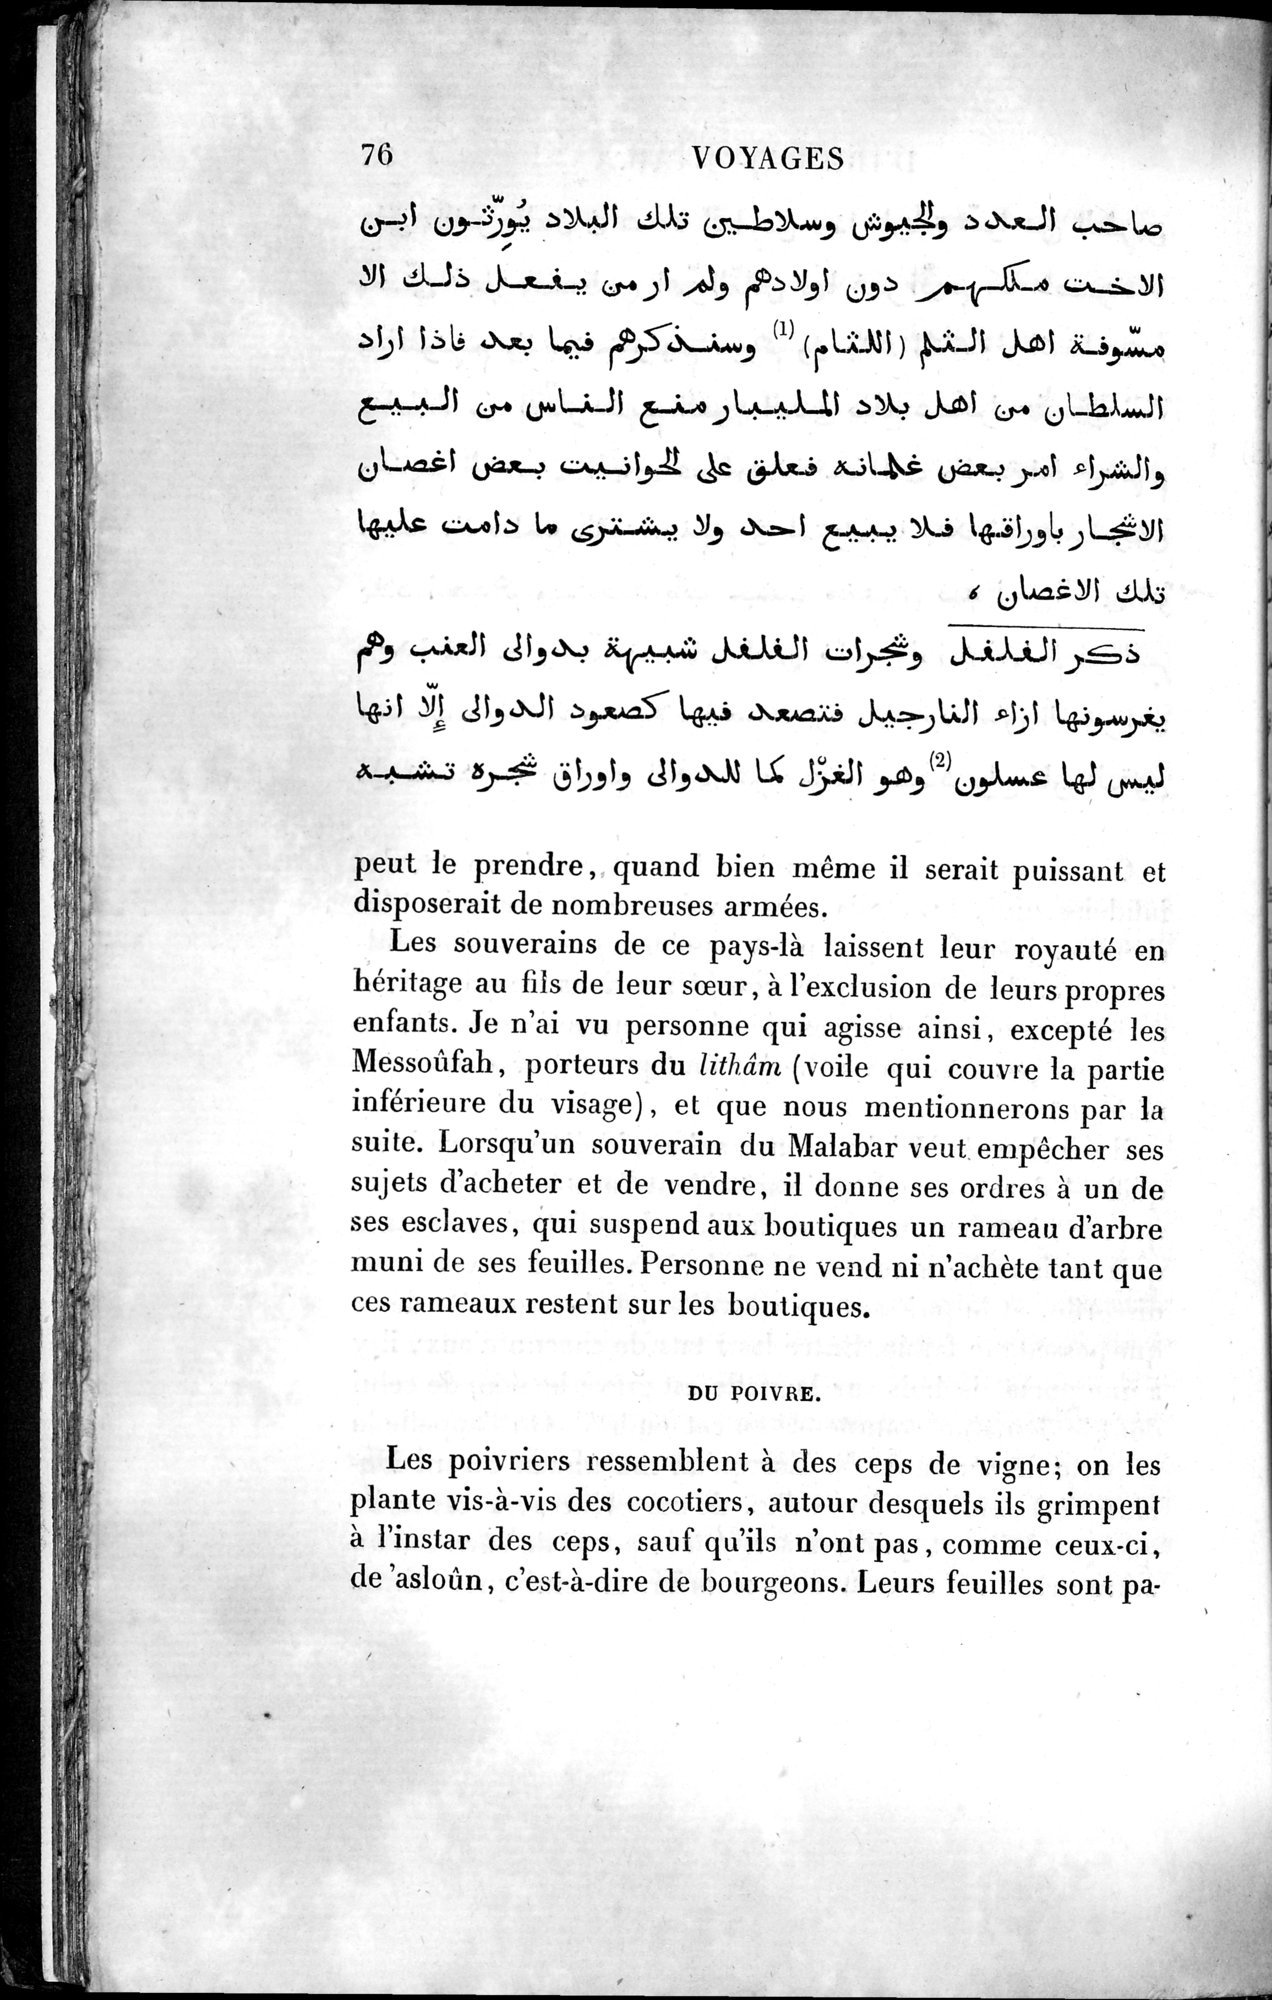 Voyages d'Ibn Batoutah : vol.4 / Page 88 (Grayscale High Resolution Image)